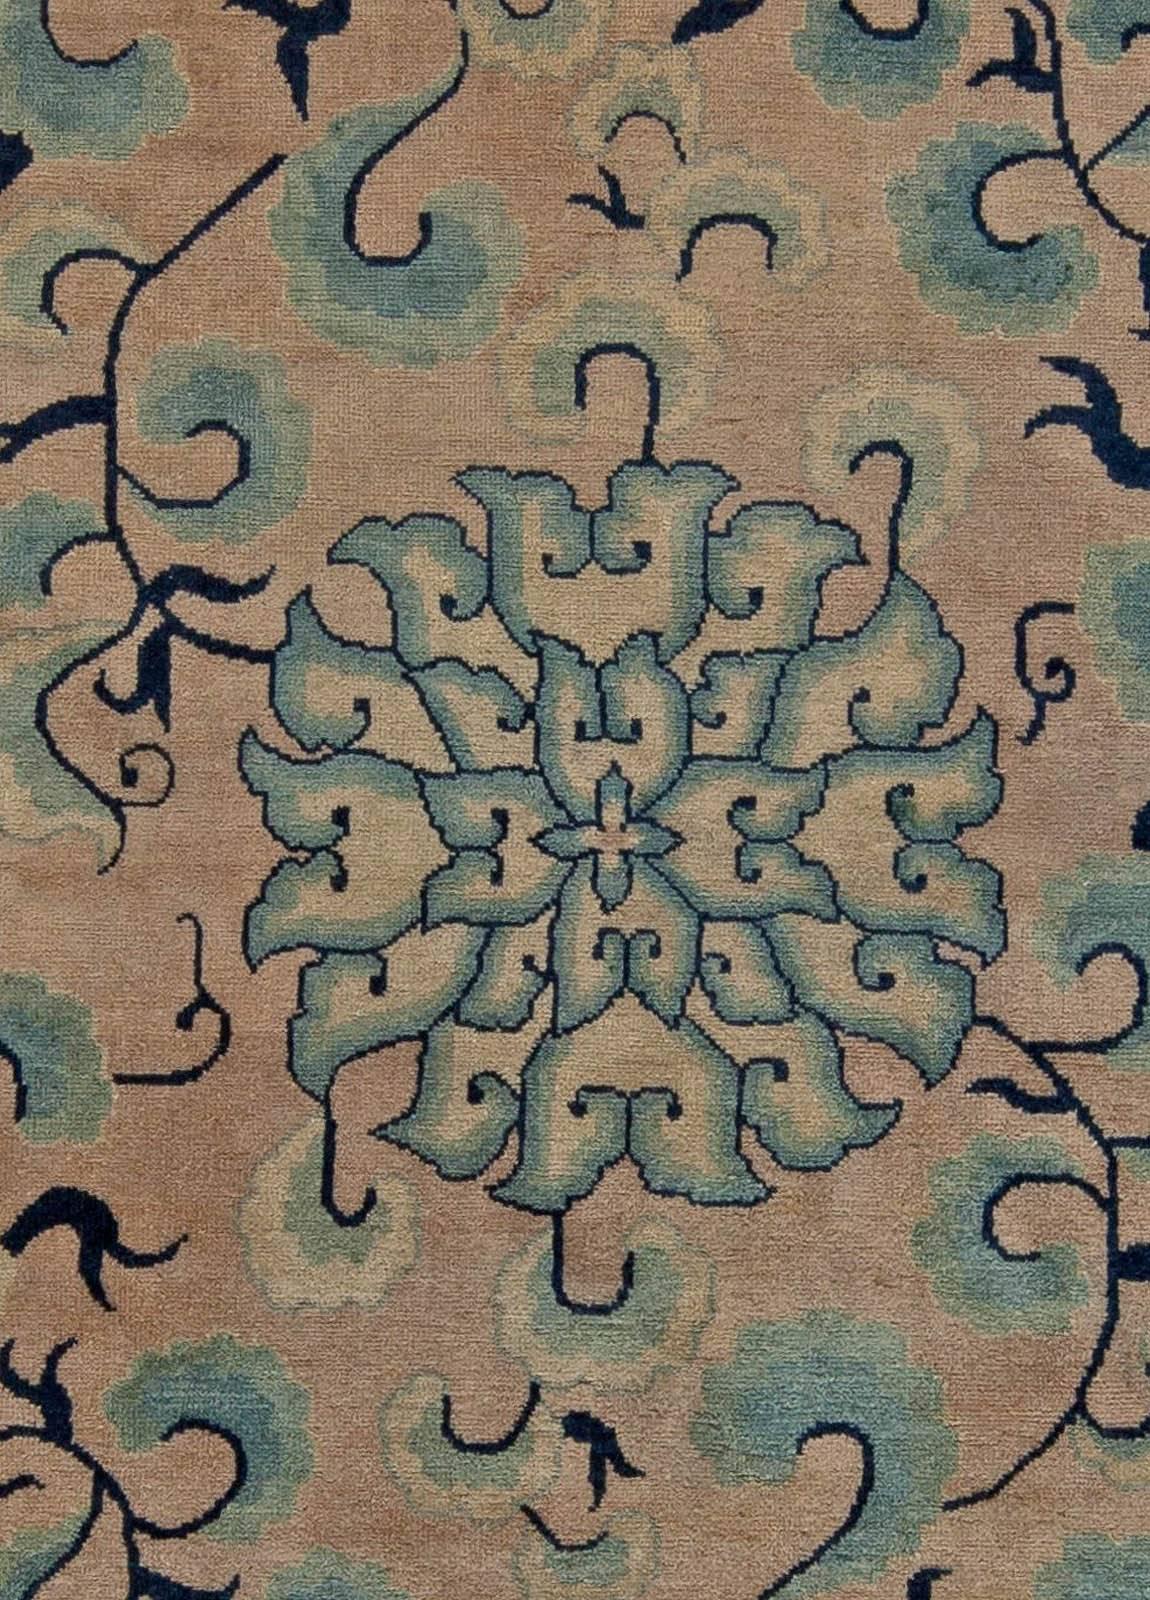 This vintage Chinese rug features an all-over design of floral motifs and cloud bands in shades of light and inky blue against a field of beige, circa 1920. A repeating swastika pattern, a staple of vintage Chinese carpets, composes the main border.